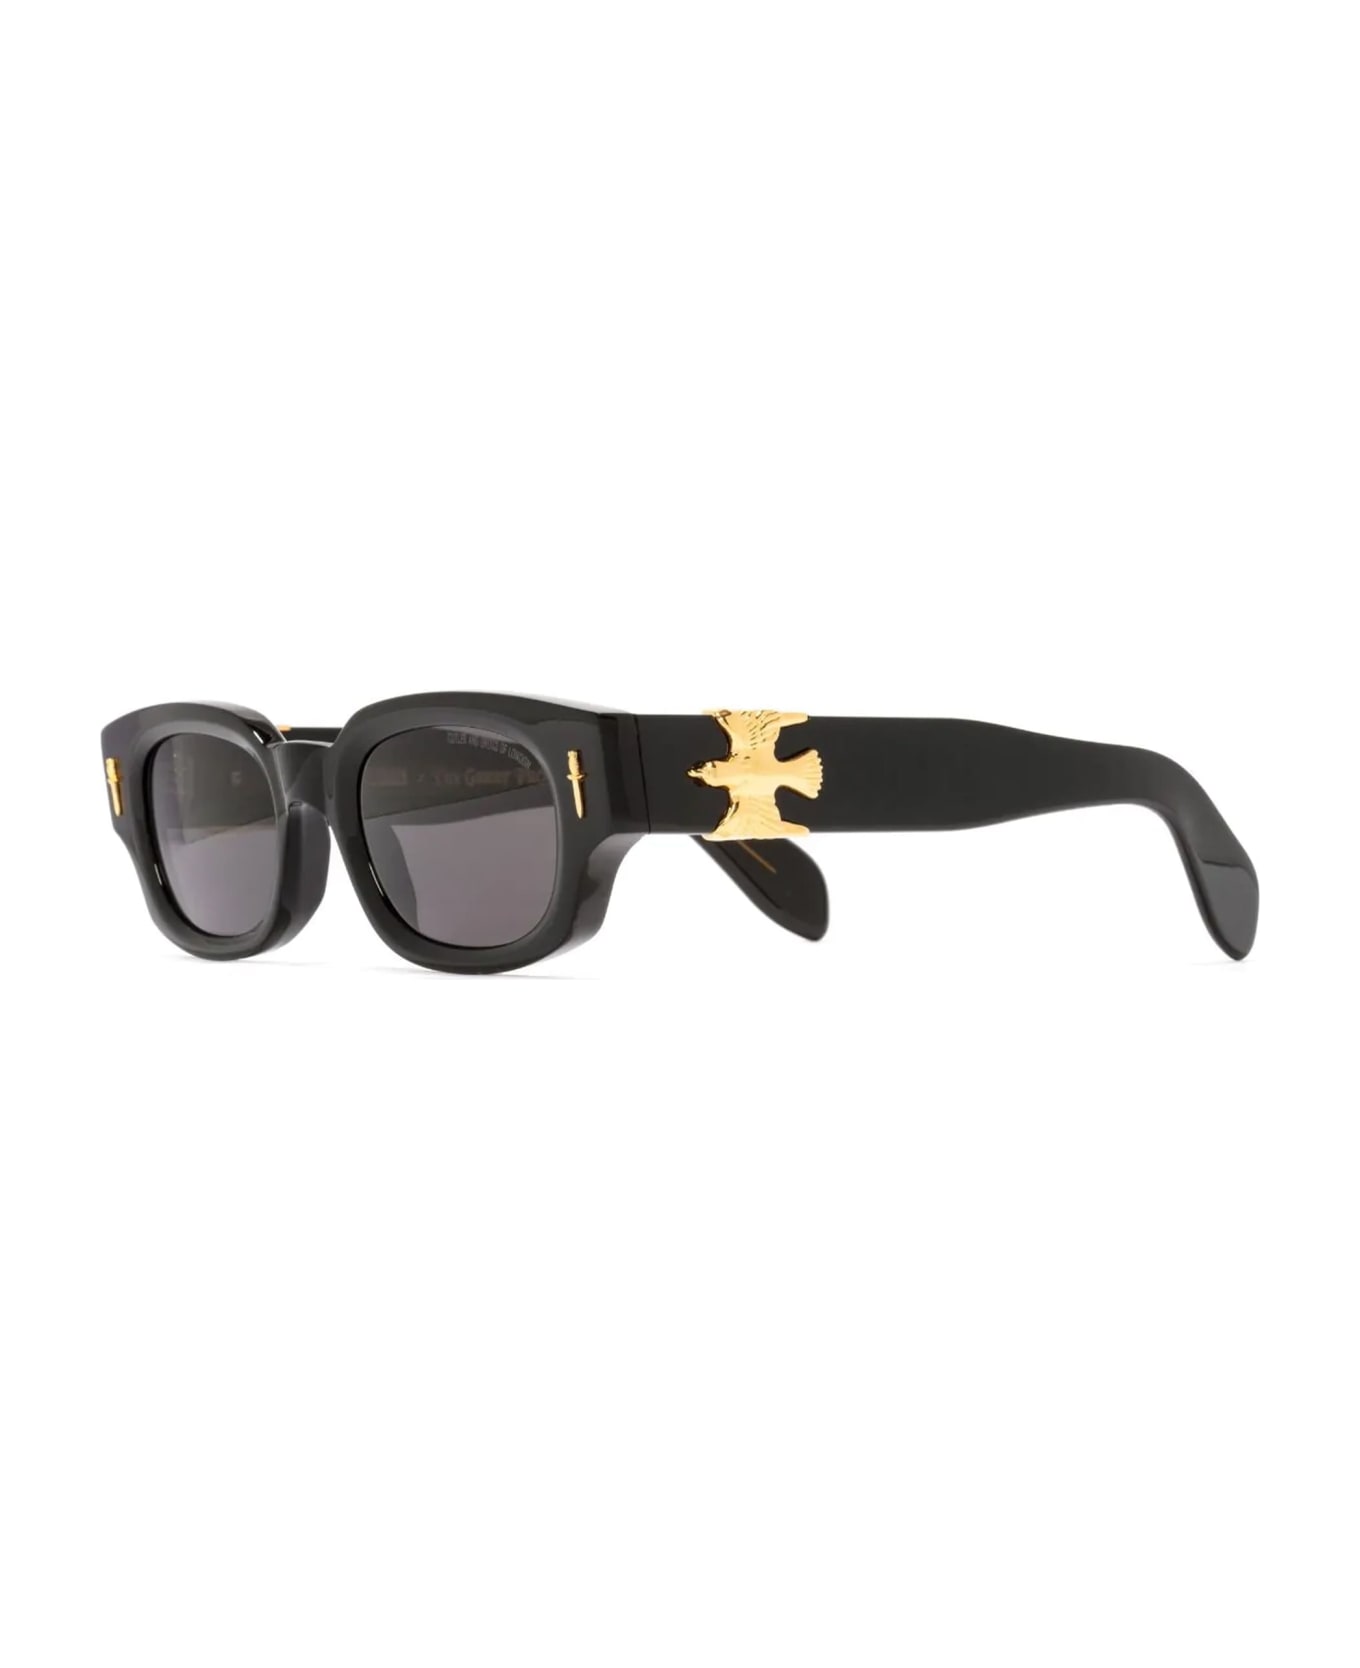 Cutler and Gross The Great Frog - Soaring Eagle - Black / Gold Sunglasses - Black